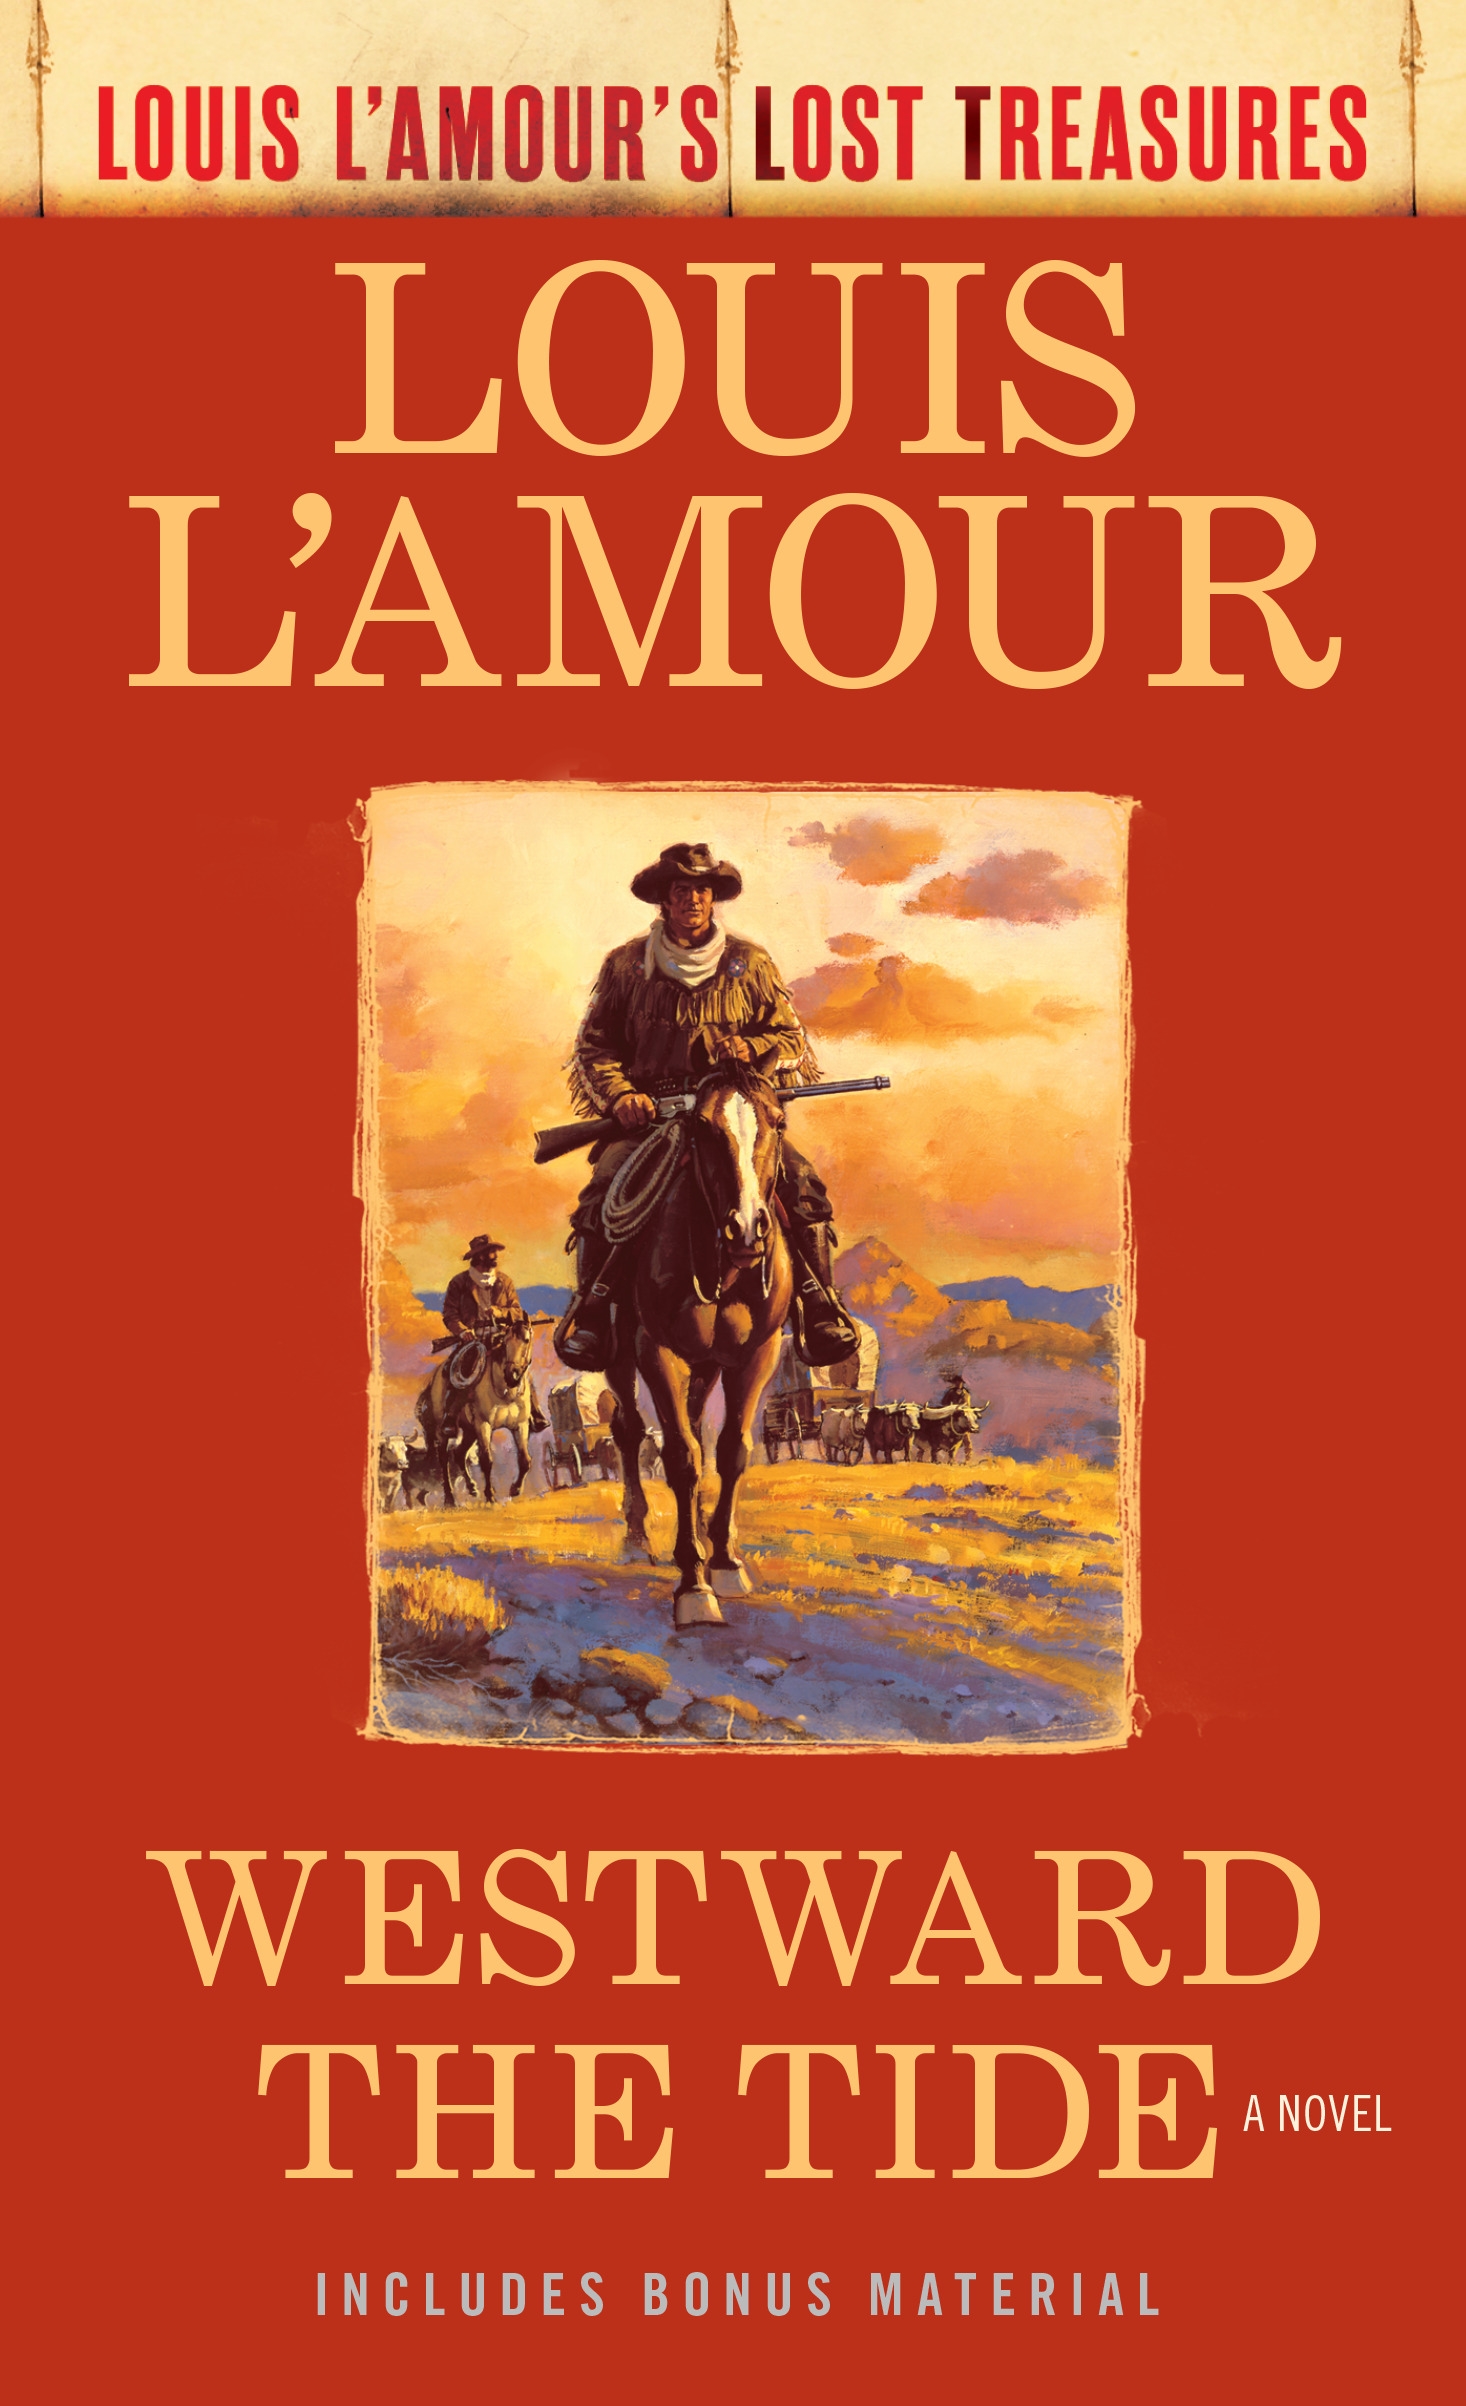  Louis L'Amour: books, biography, latest update